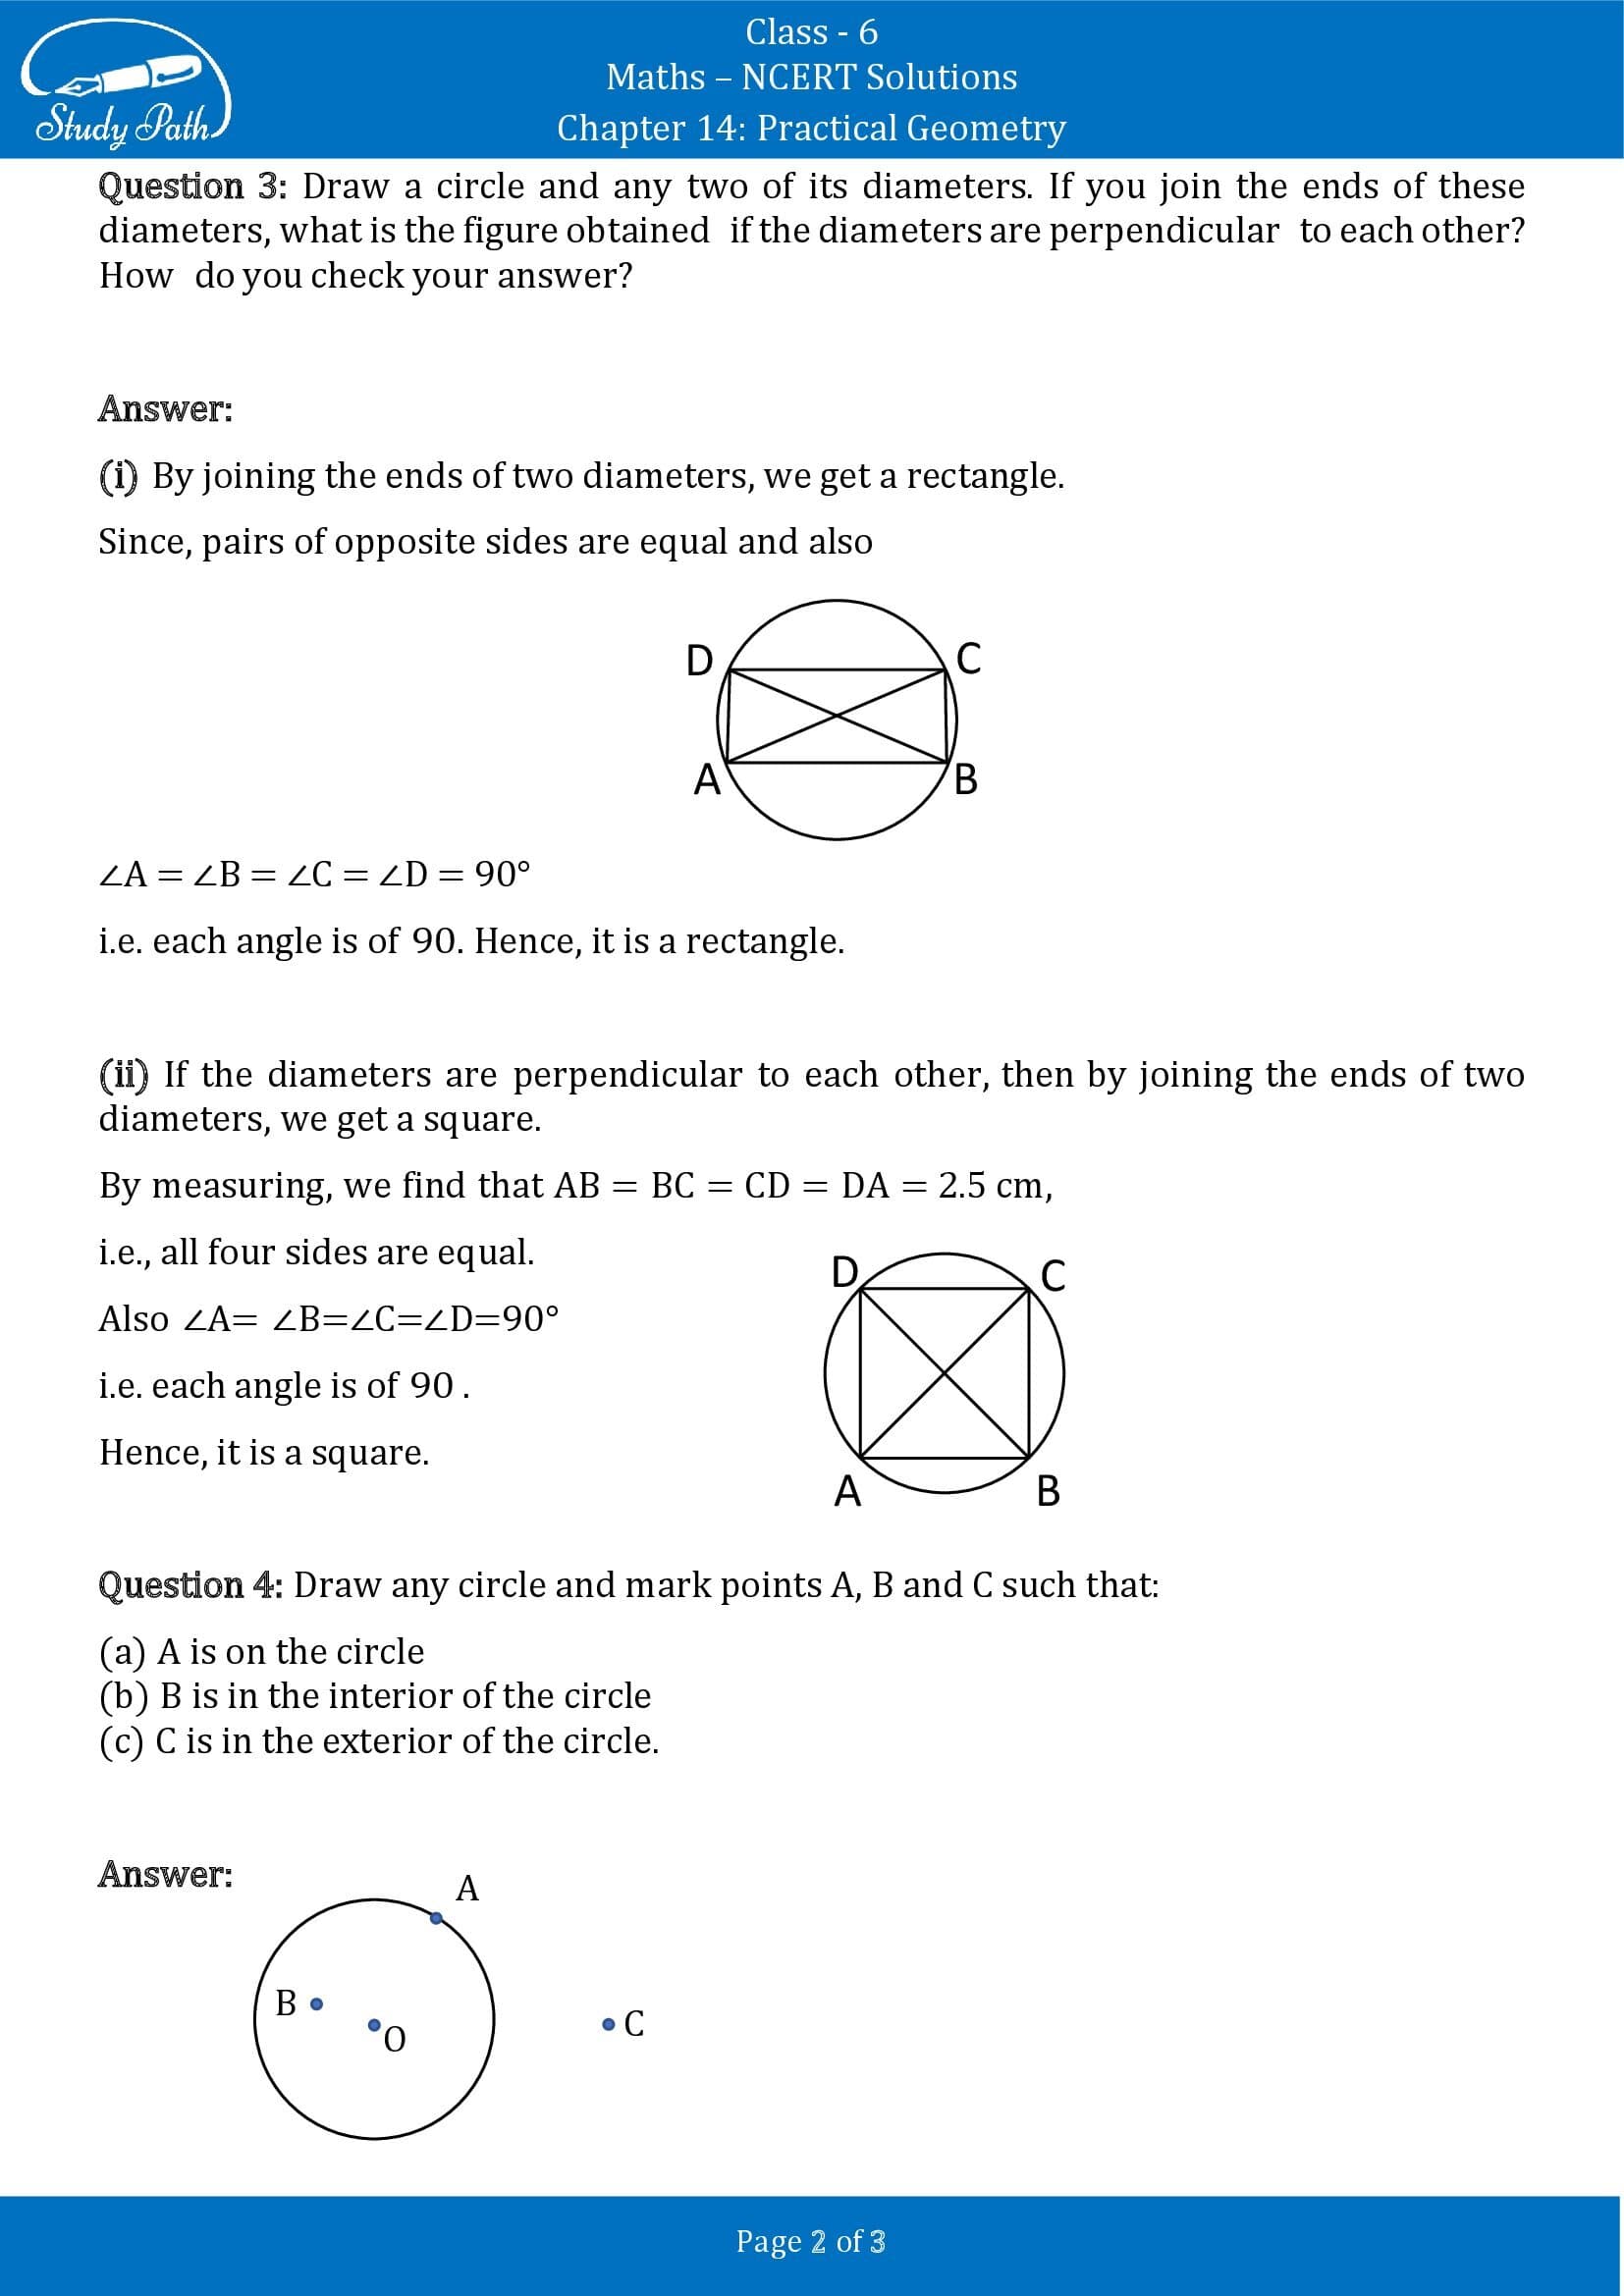 NCERT Solutions for Class 6 Maths Chapter 14 Practical Geometry Exercise 14.1 00002